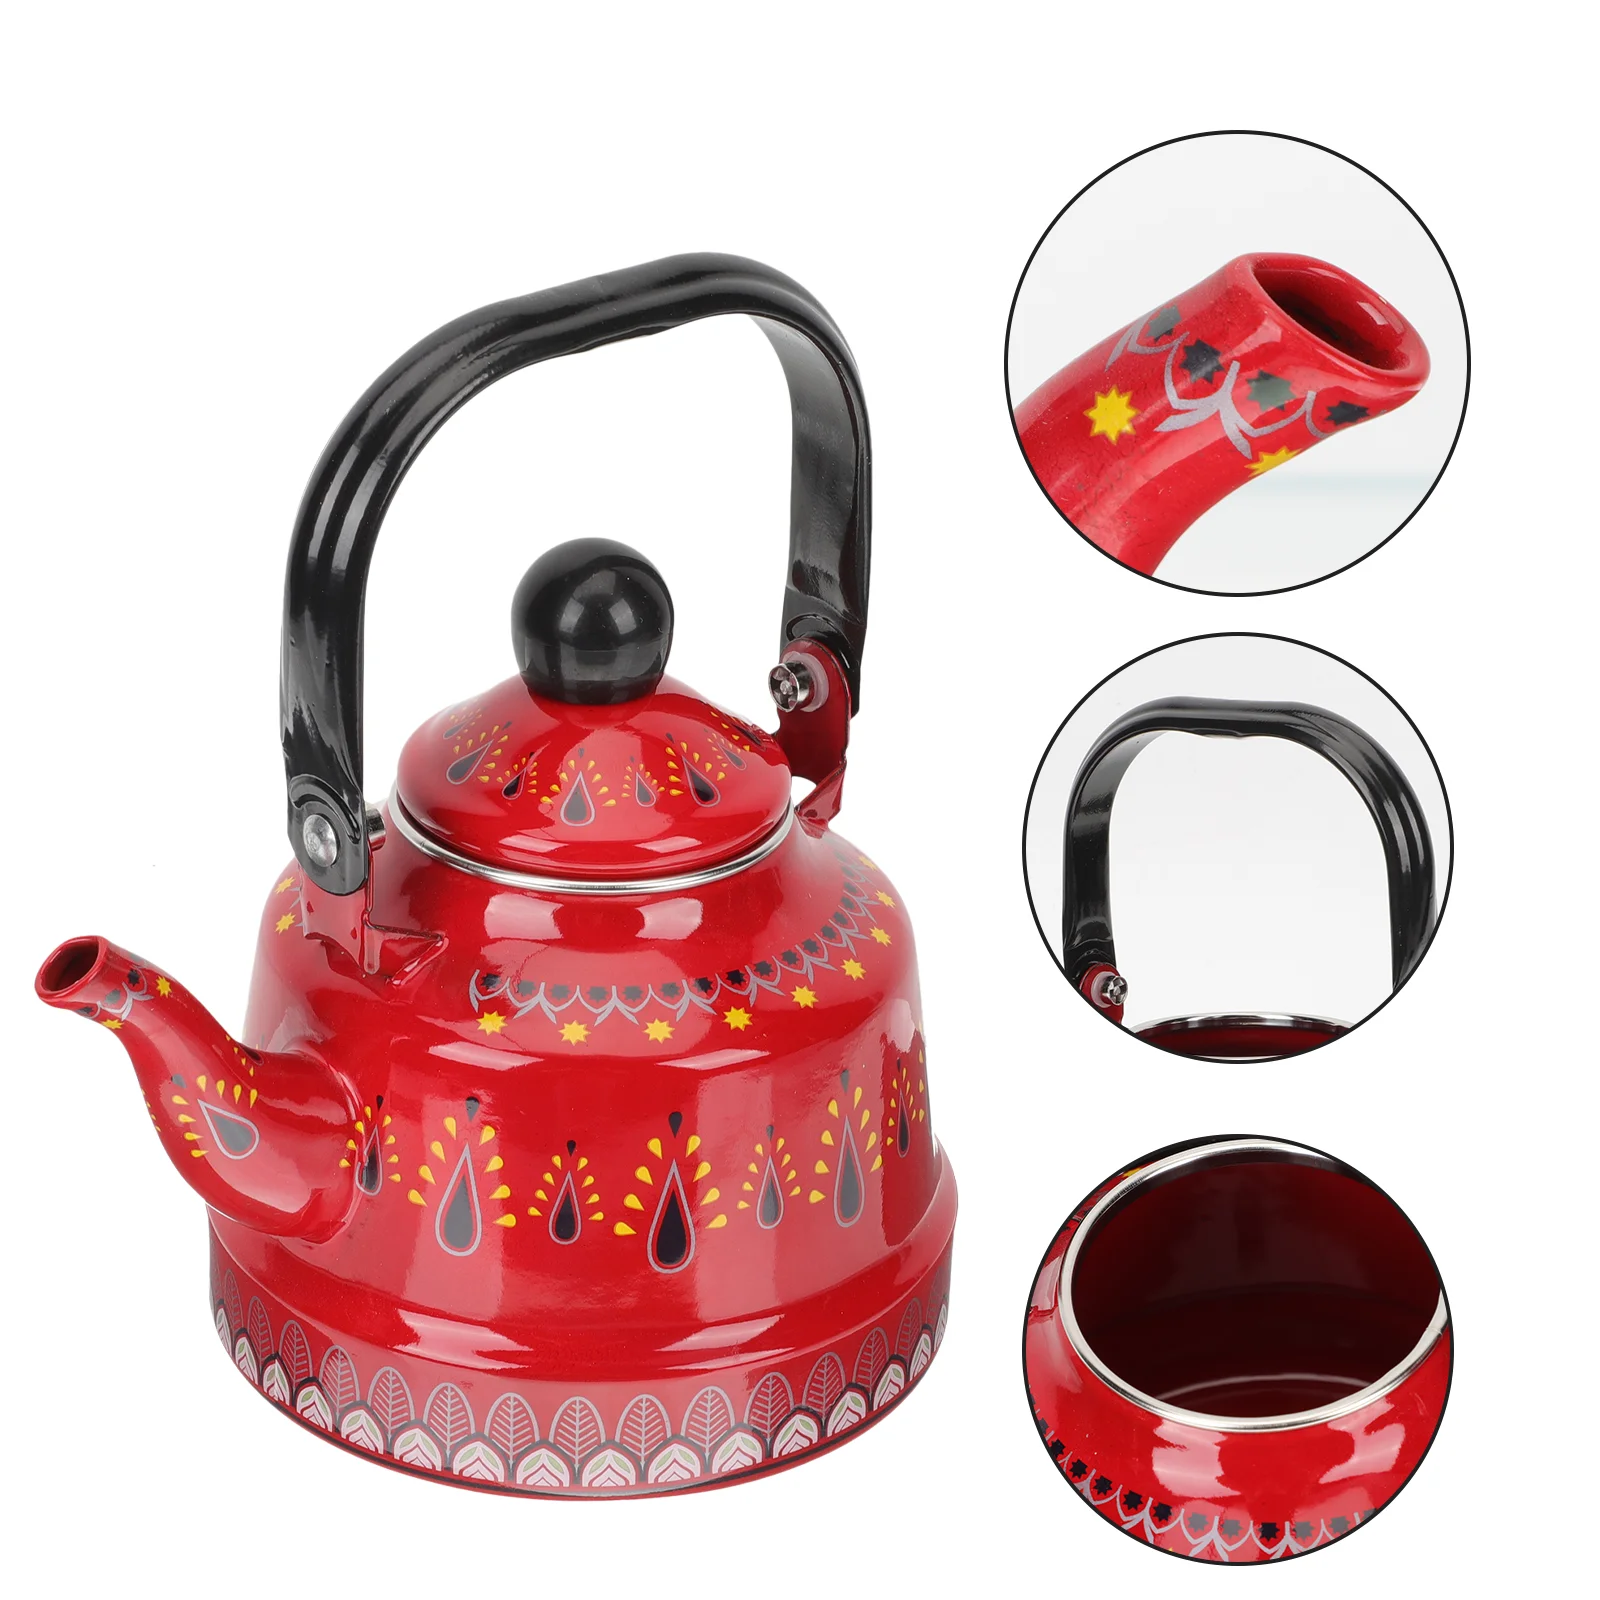 

Kettle Tea Teapot Water Pot Stovetop Enamel Office The Stove Coffee Merchandise Whistling Teakettle Ceramic Camping Boiling